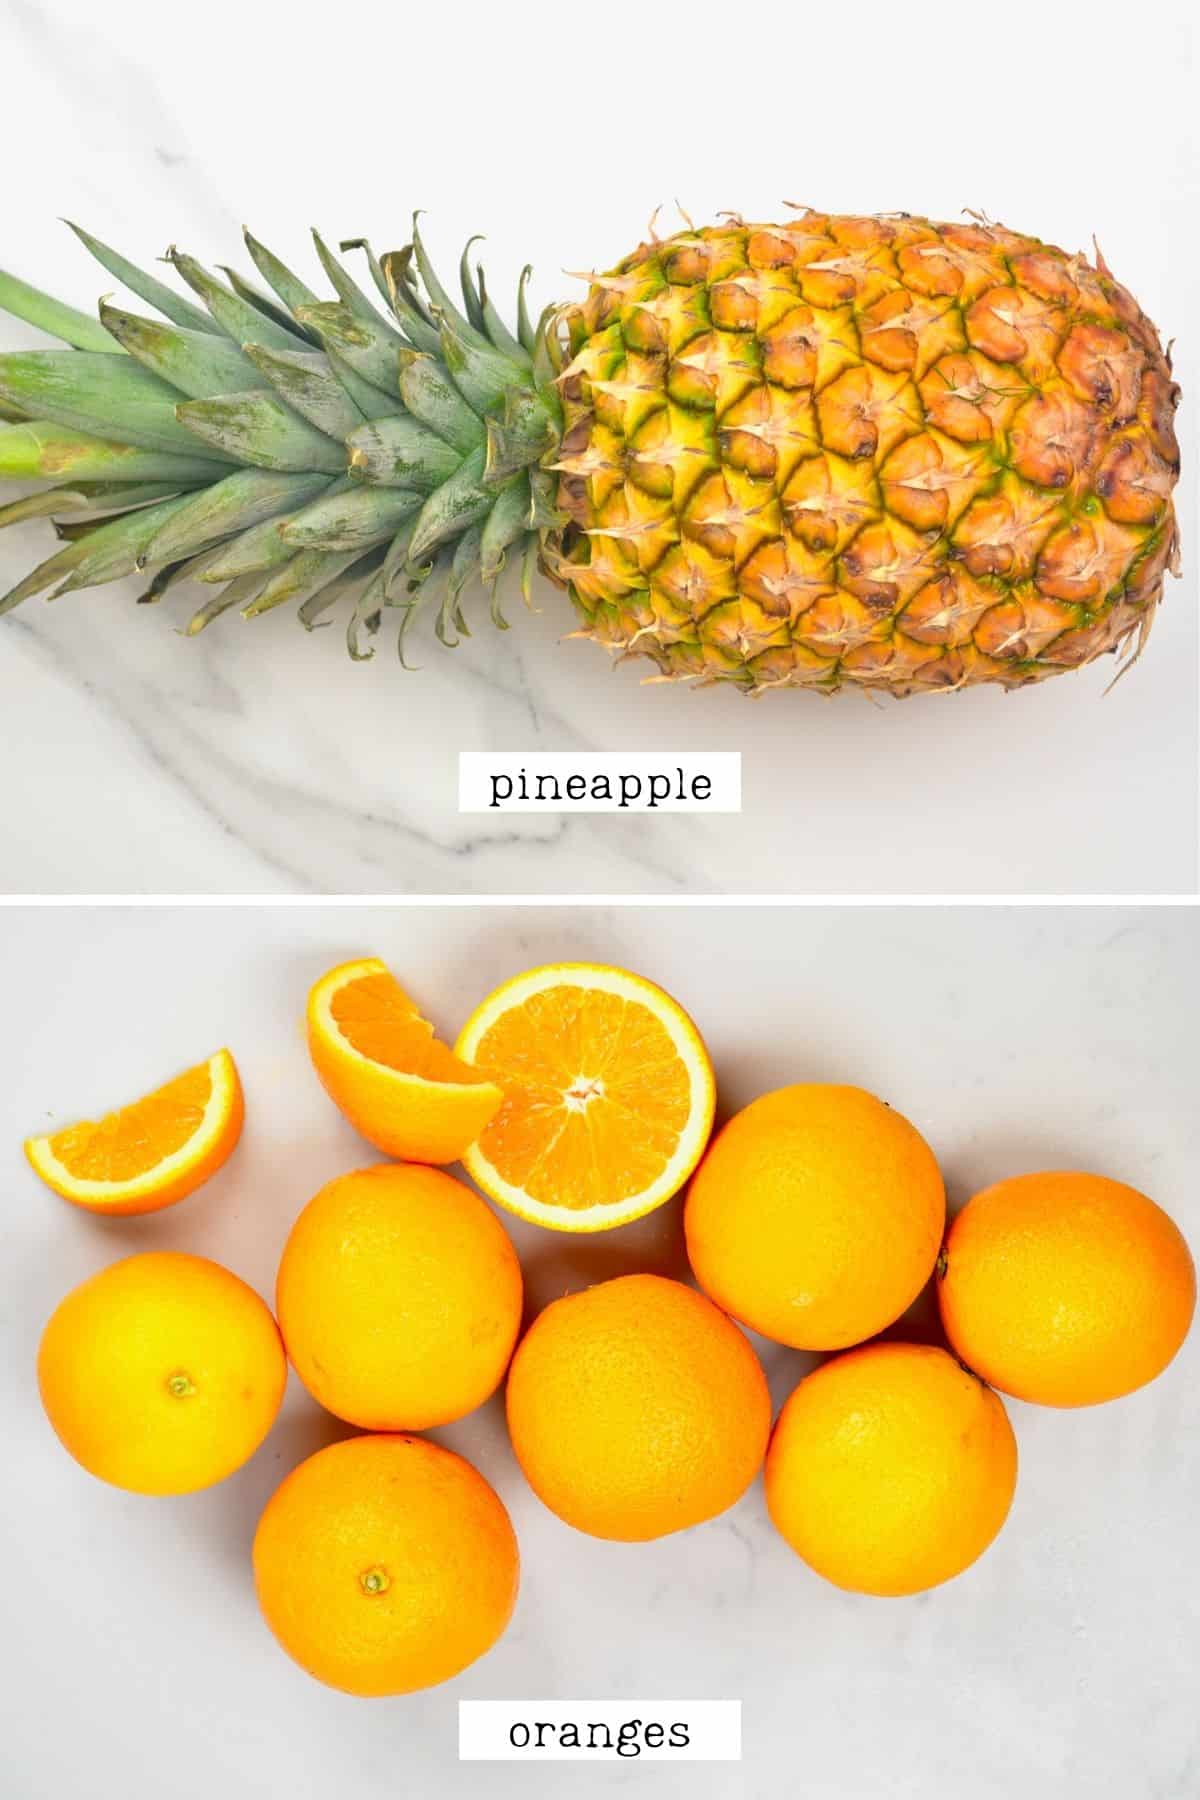 High Quality Comparing Pineapples and Oranges Blank Meme Template